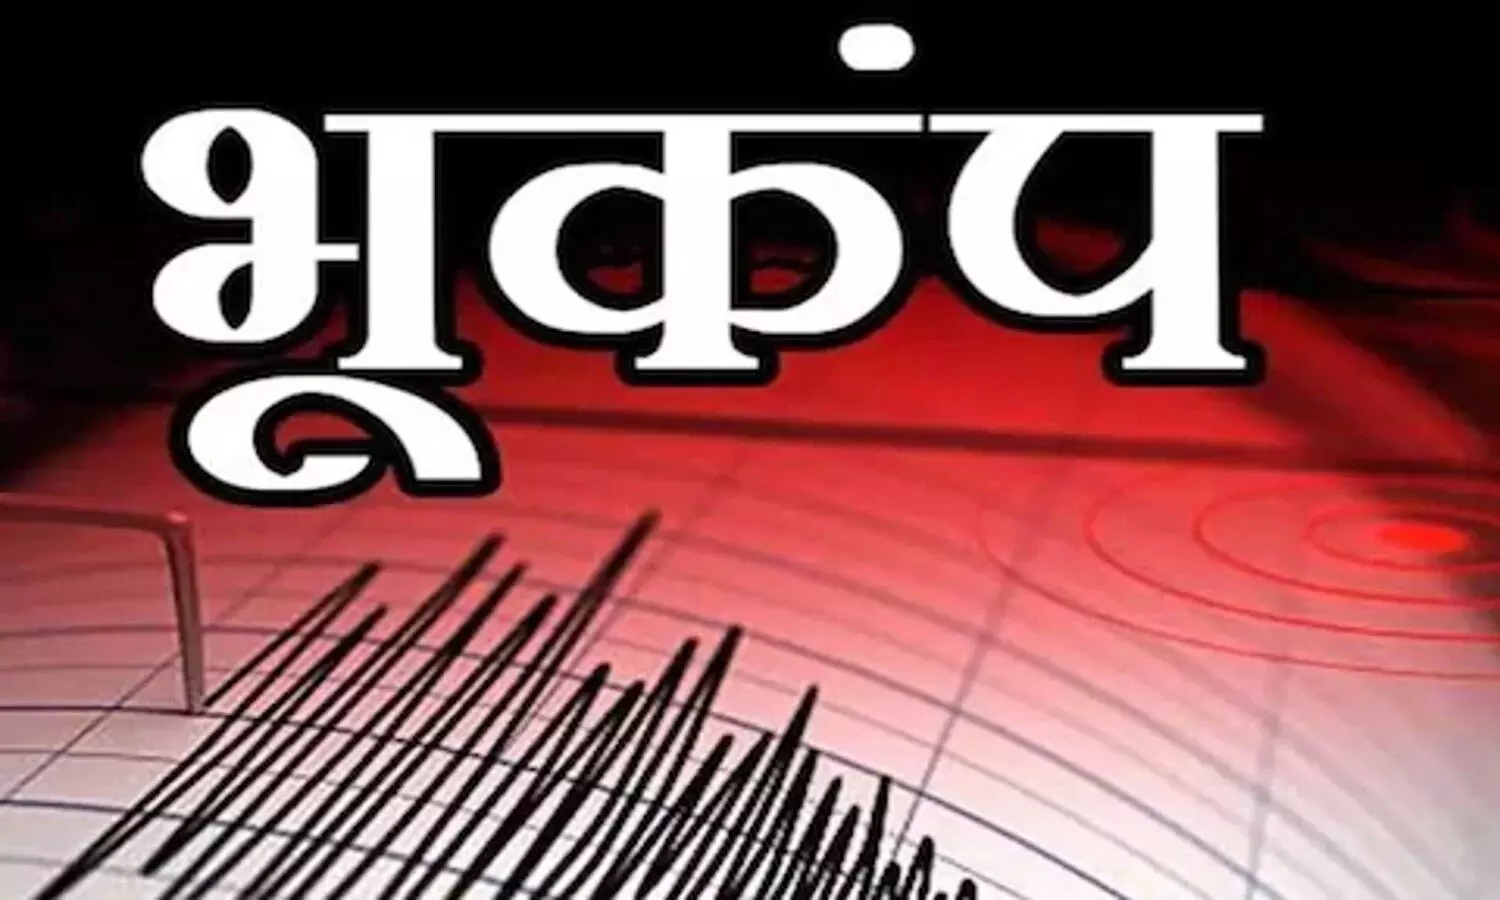 earthquake in gujarat mild tremors magnitude 3 point 5 on richter scale